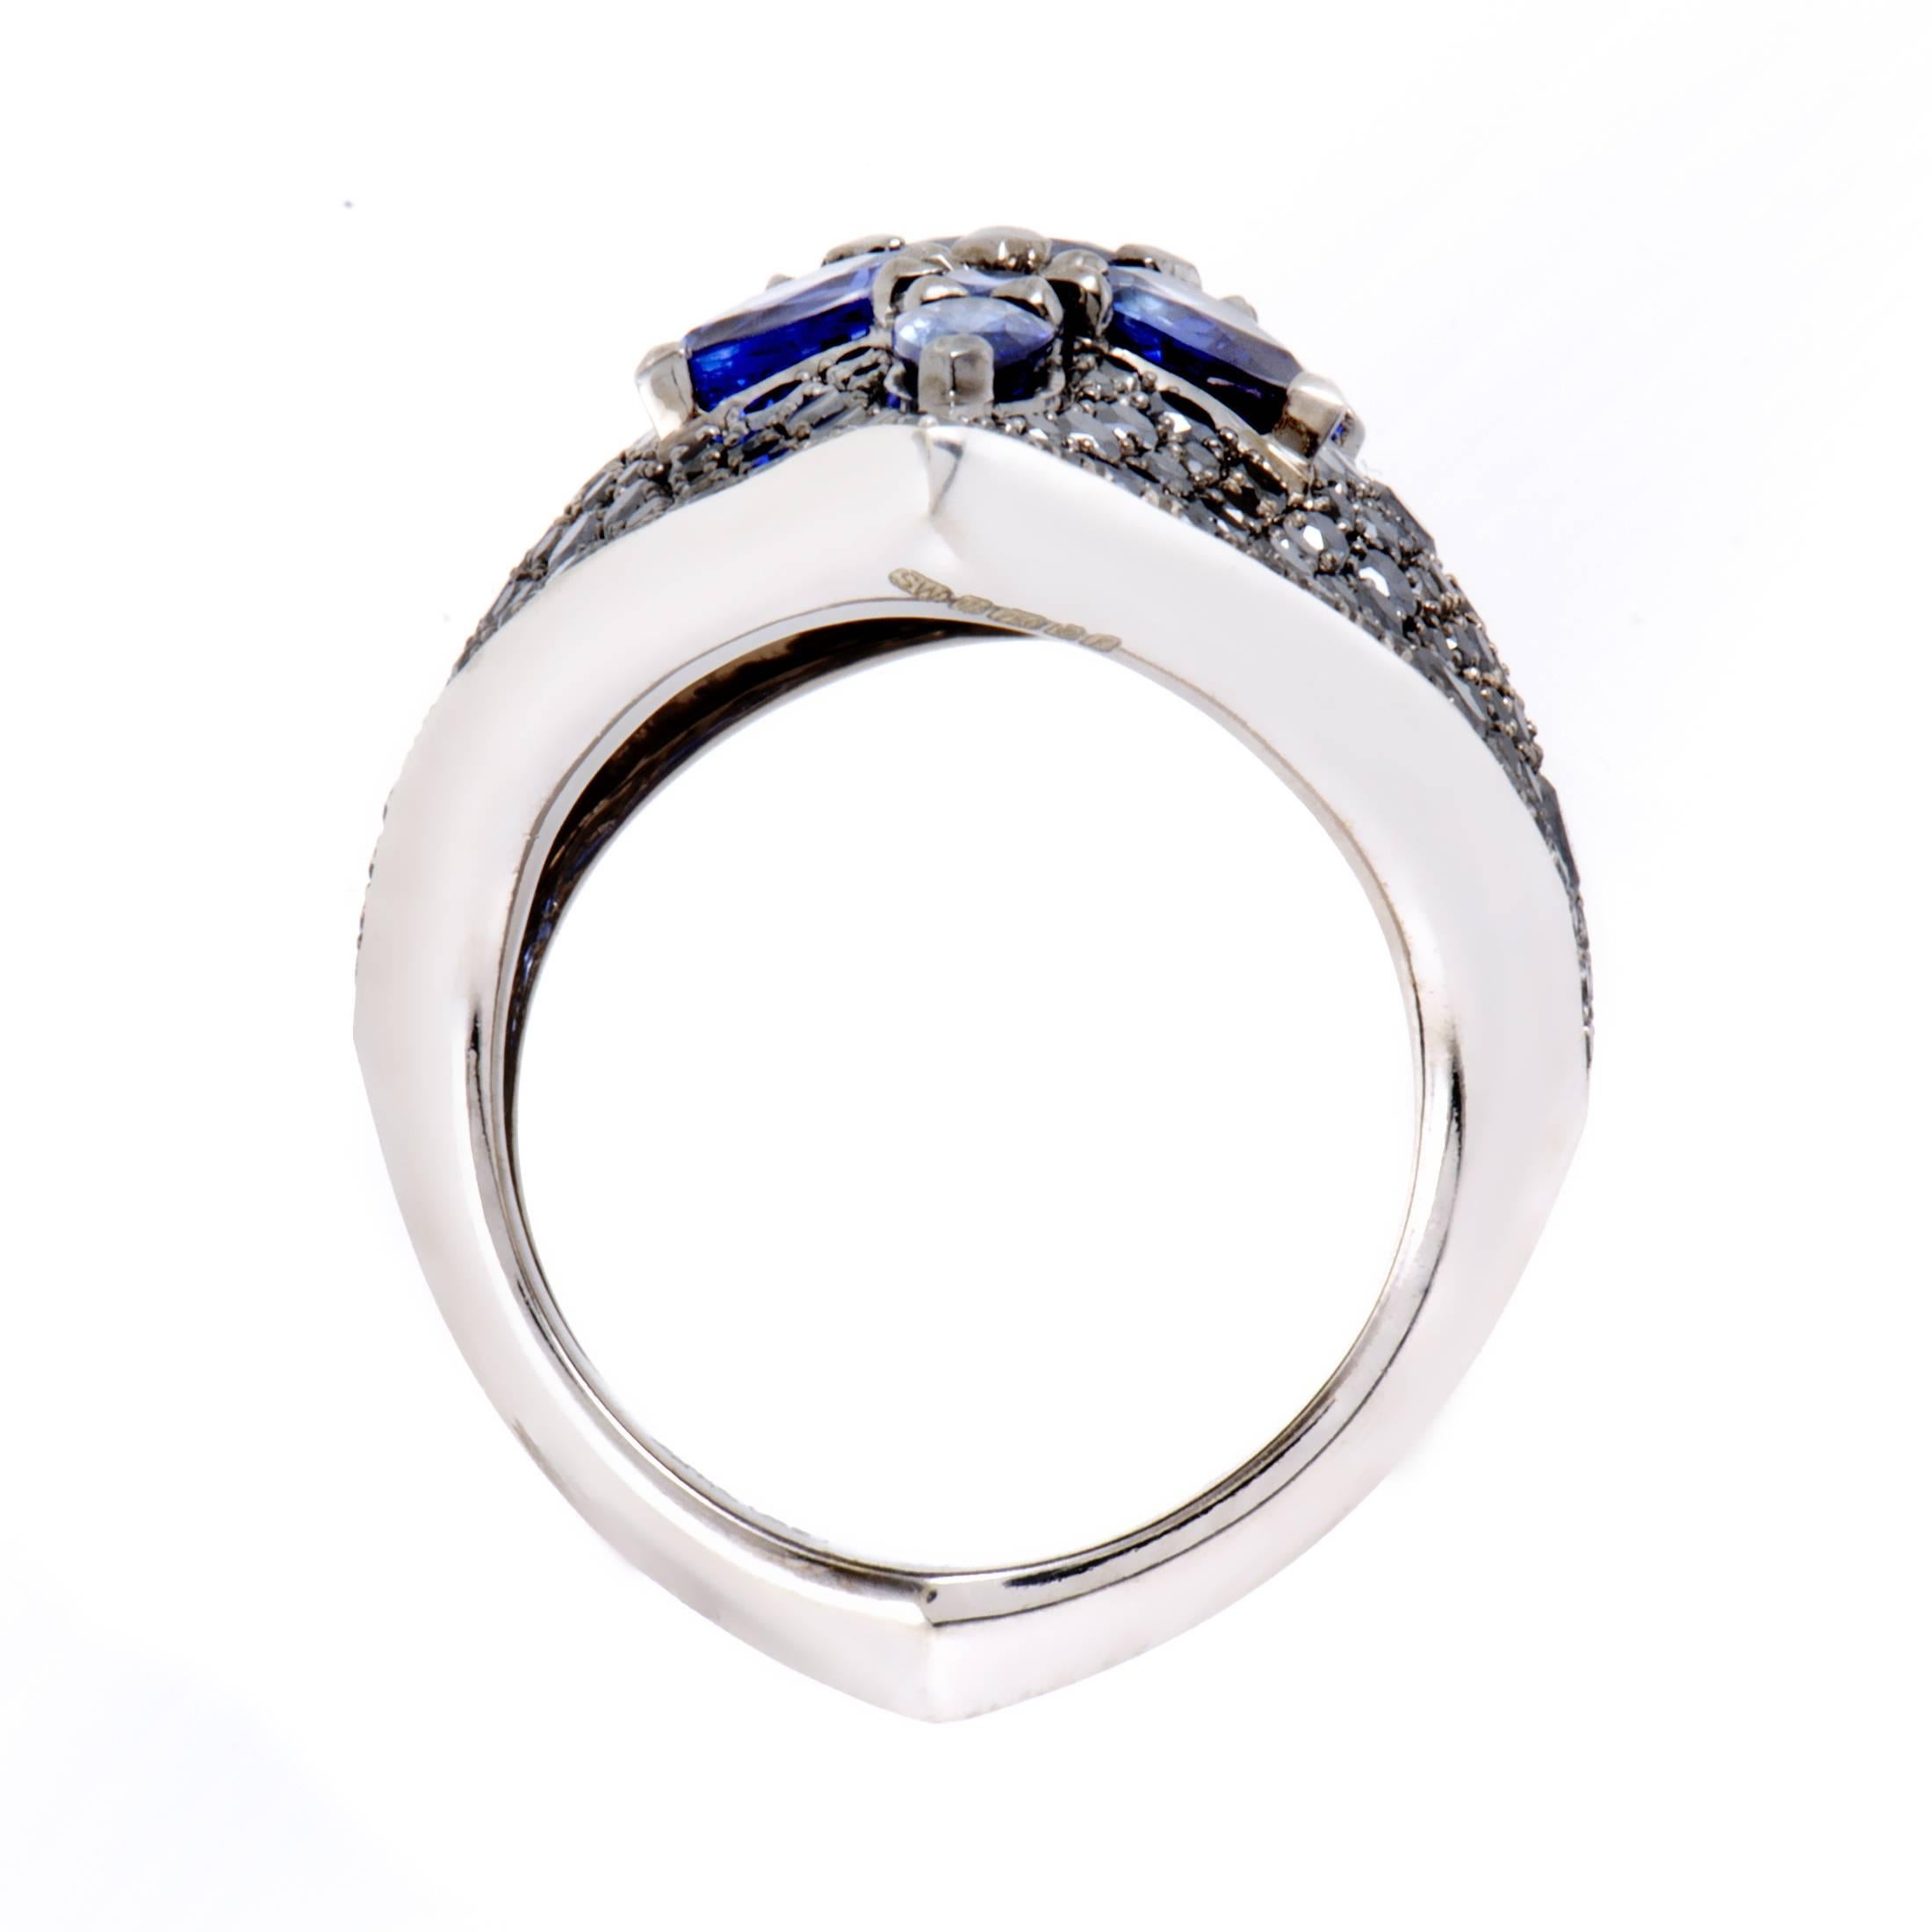 The ever-captivating combination of splendid black diamonds and alluringly regal blue sapphires is featured in this stunning ring from Stephen Webster presented within the majestic “Belle Epoque” collection. The ring is made of prestigious 18K white